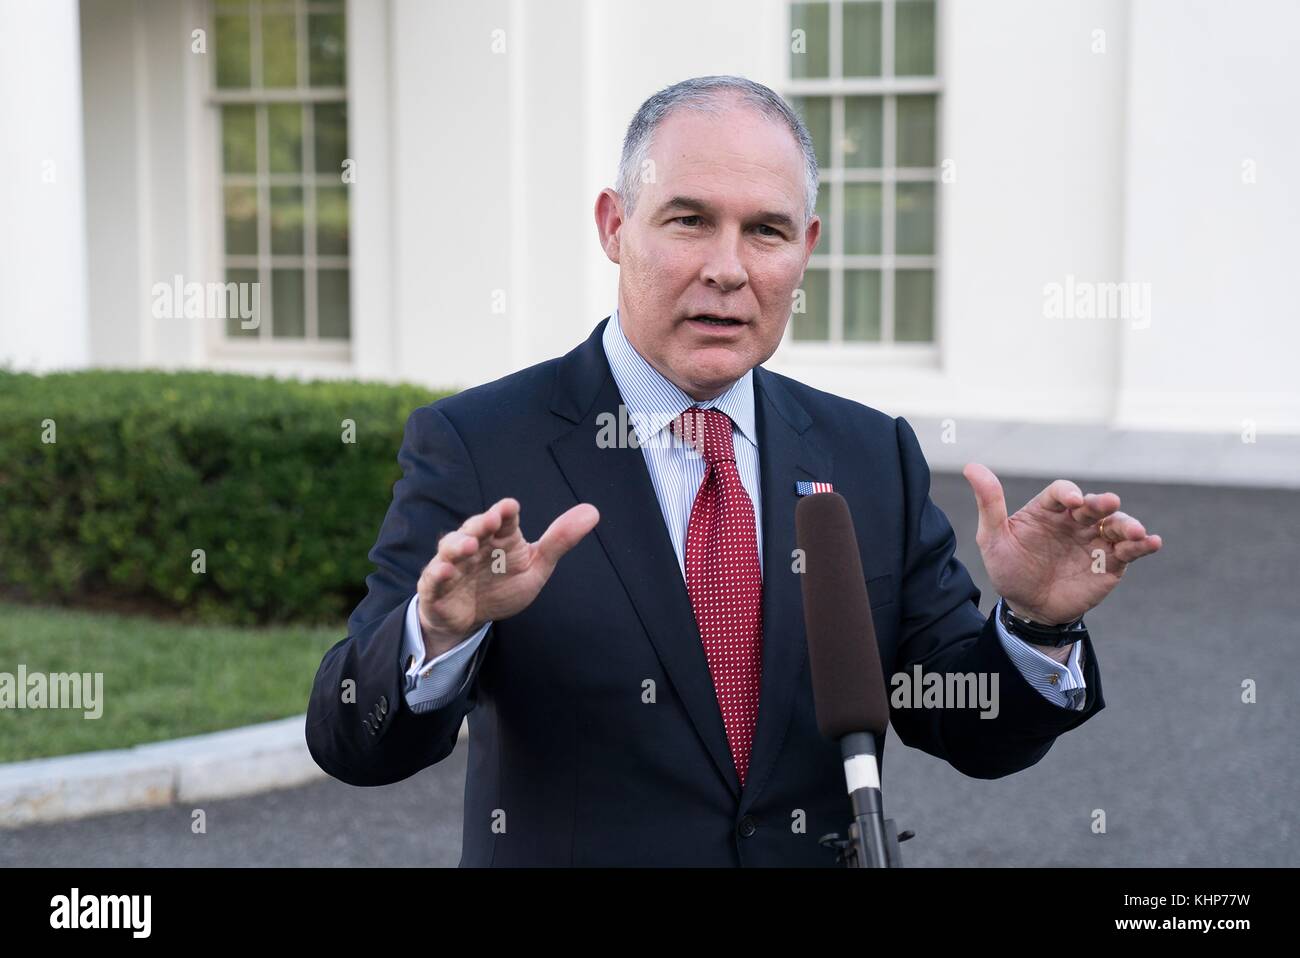 U.S. Administrator of the Environmental Protection Agency Scott Pruitt speaks to the media outside the West Wing of the White House July 25, 2017 in Washington, D.C. Stock Photo